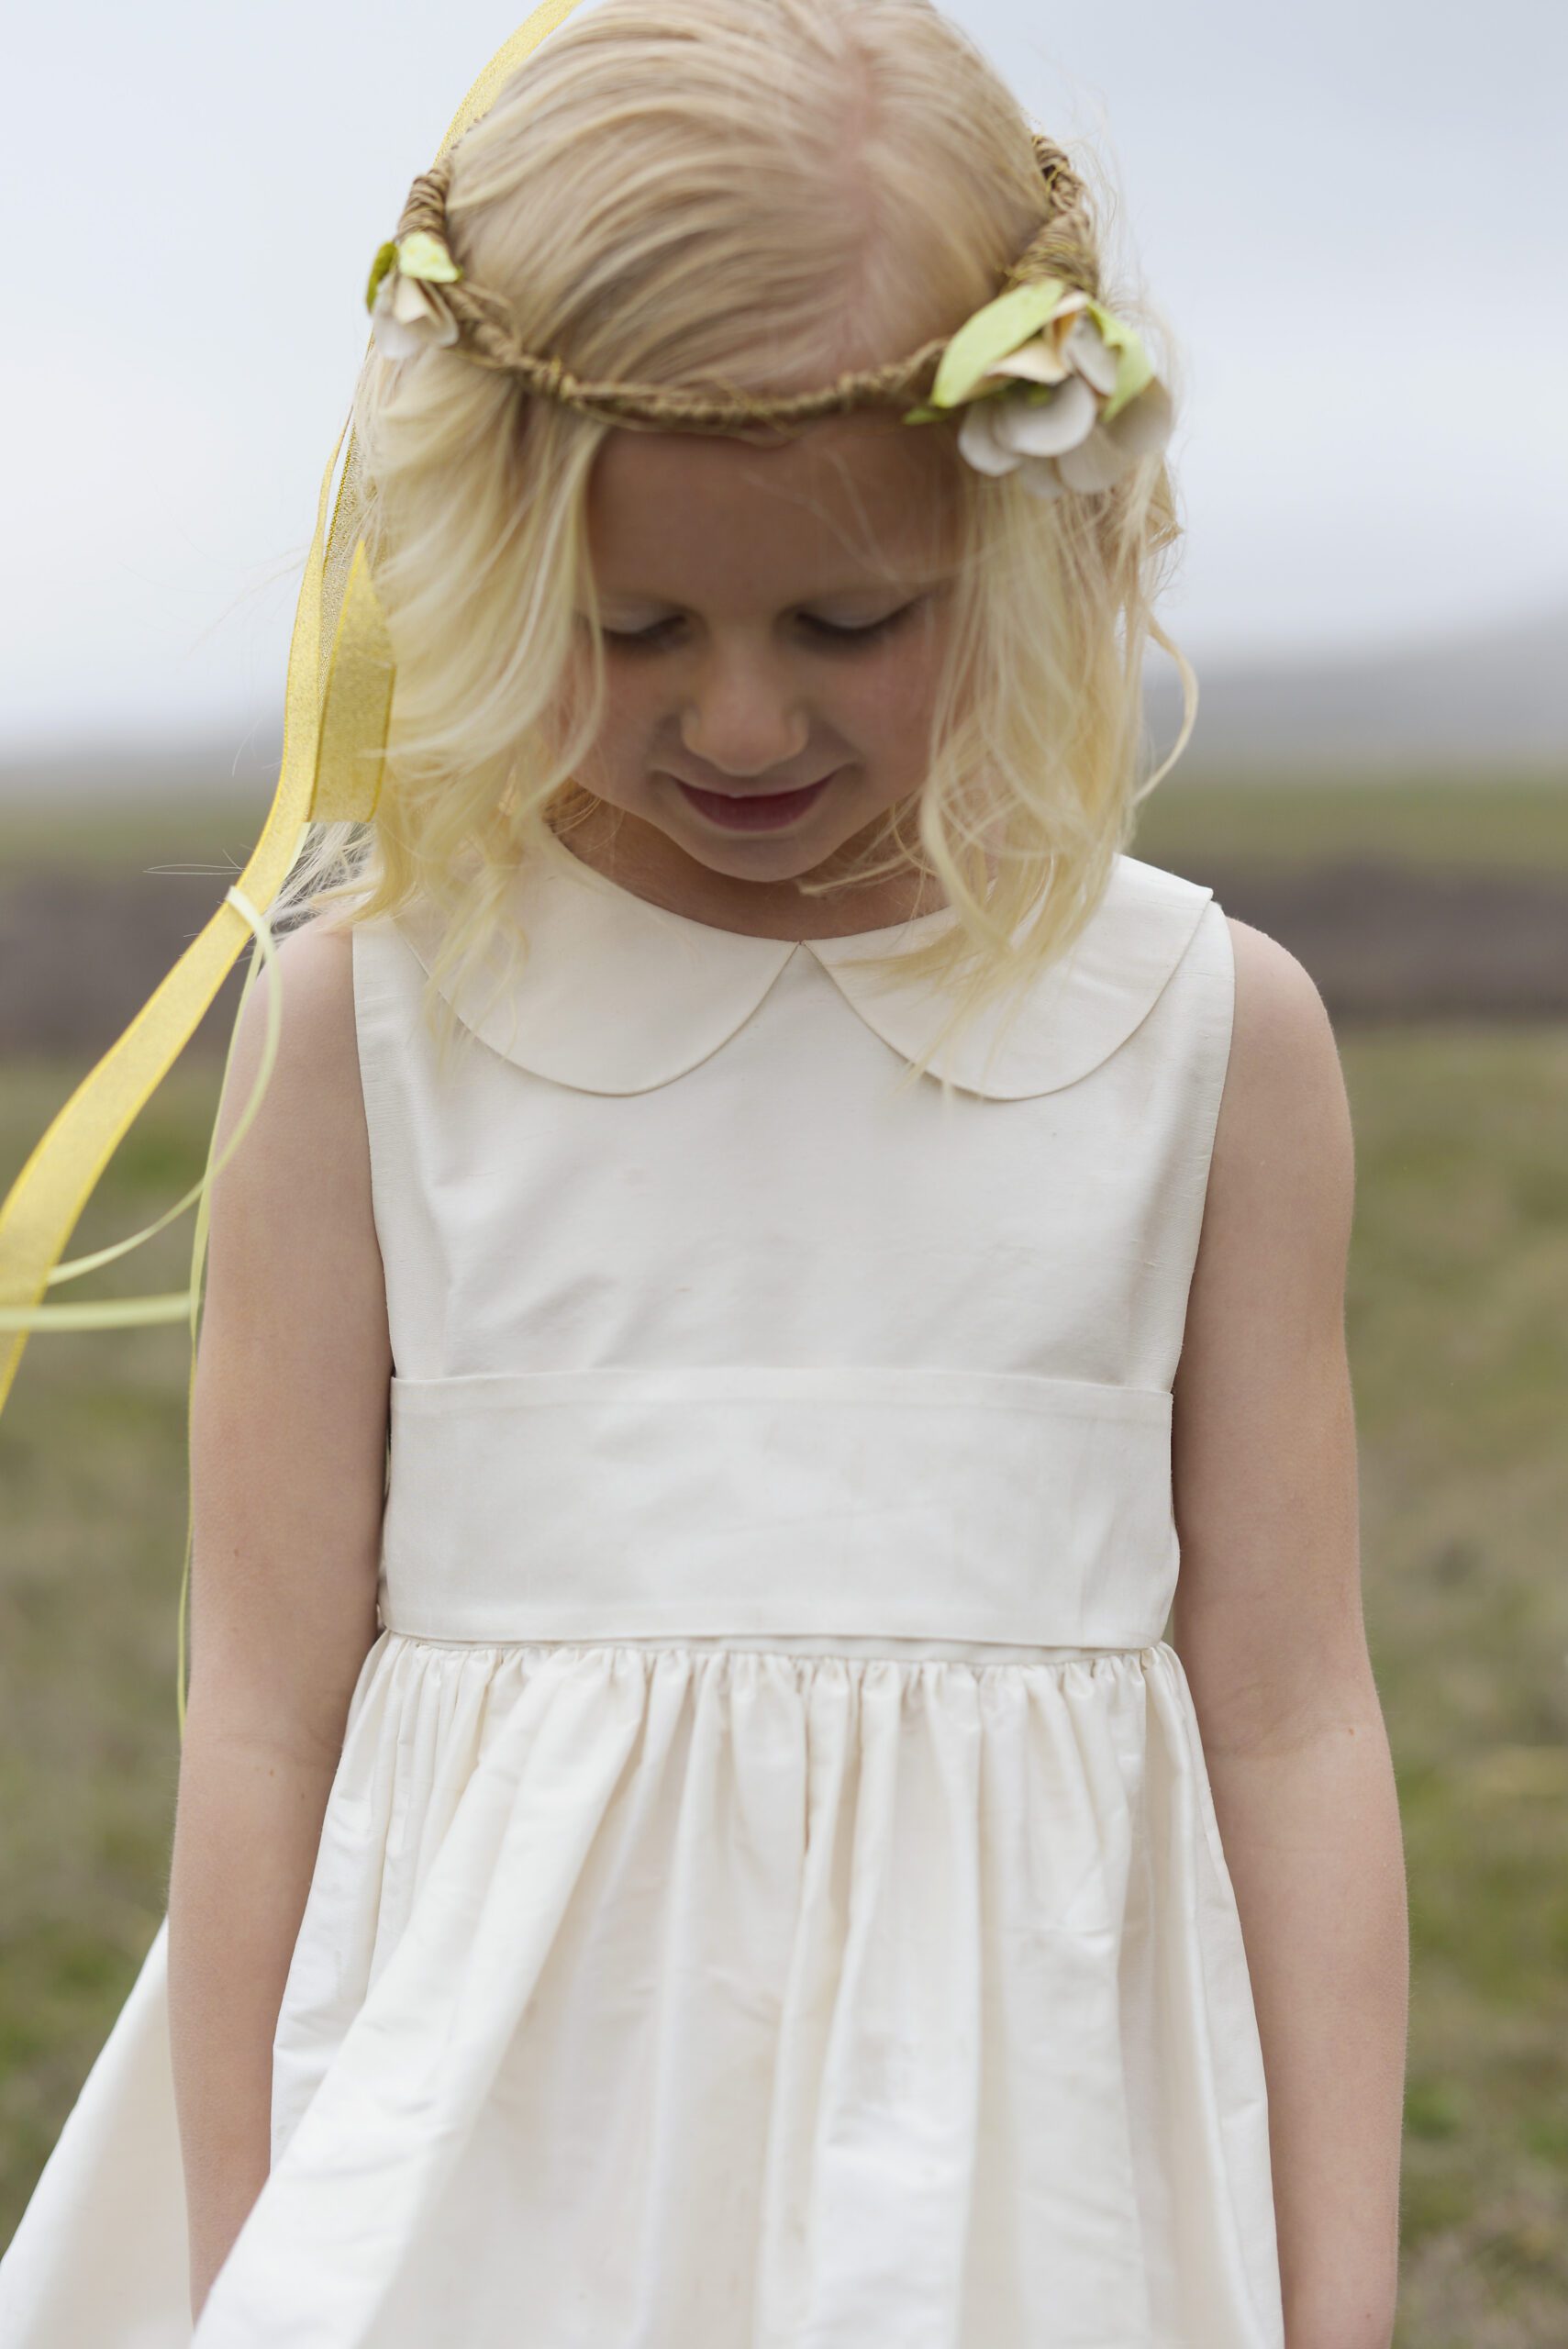 A photo of a 7 year old girl wearing a silk flower girl dress with a Peter Pan collar